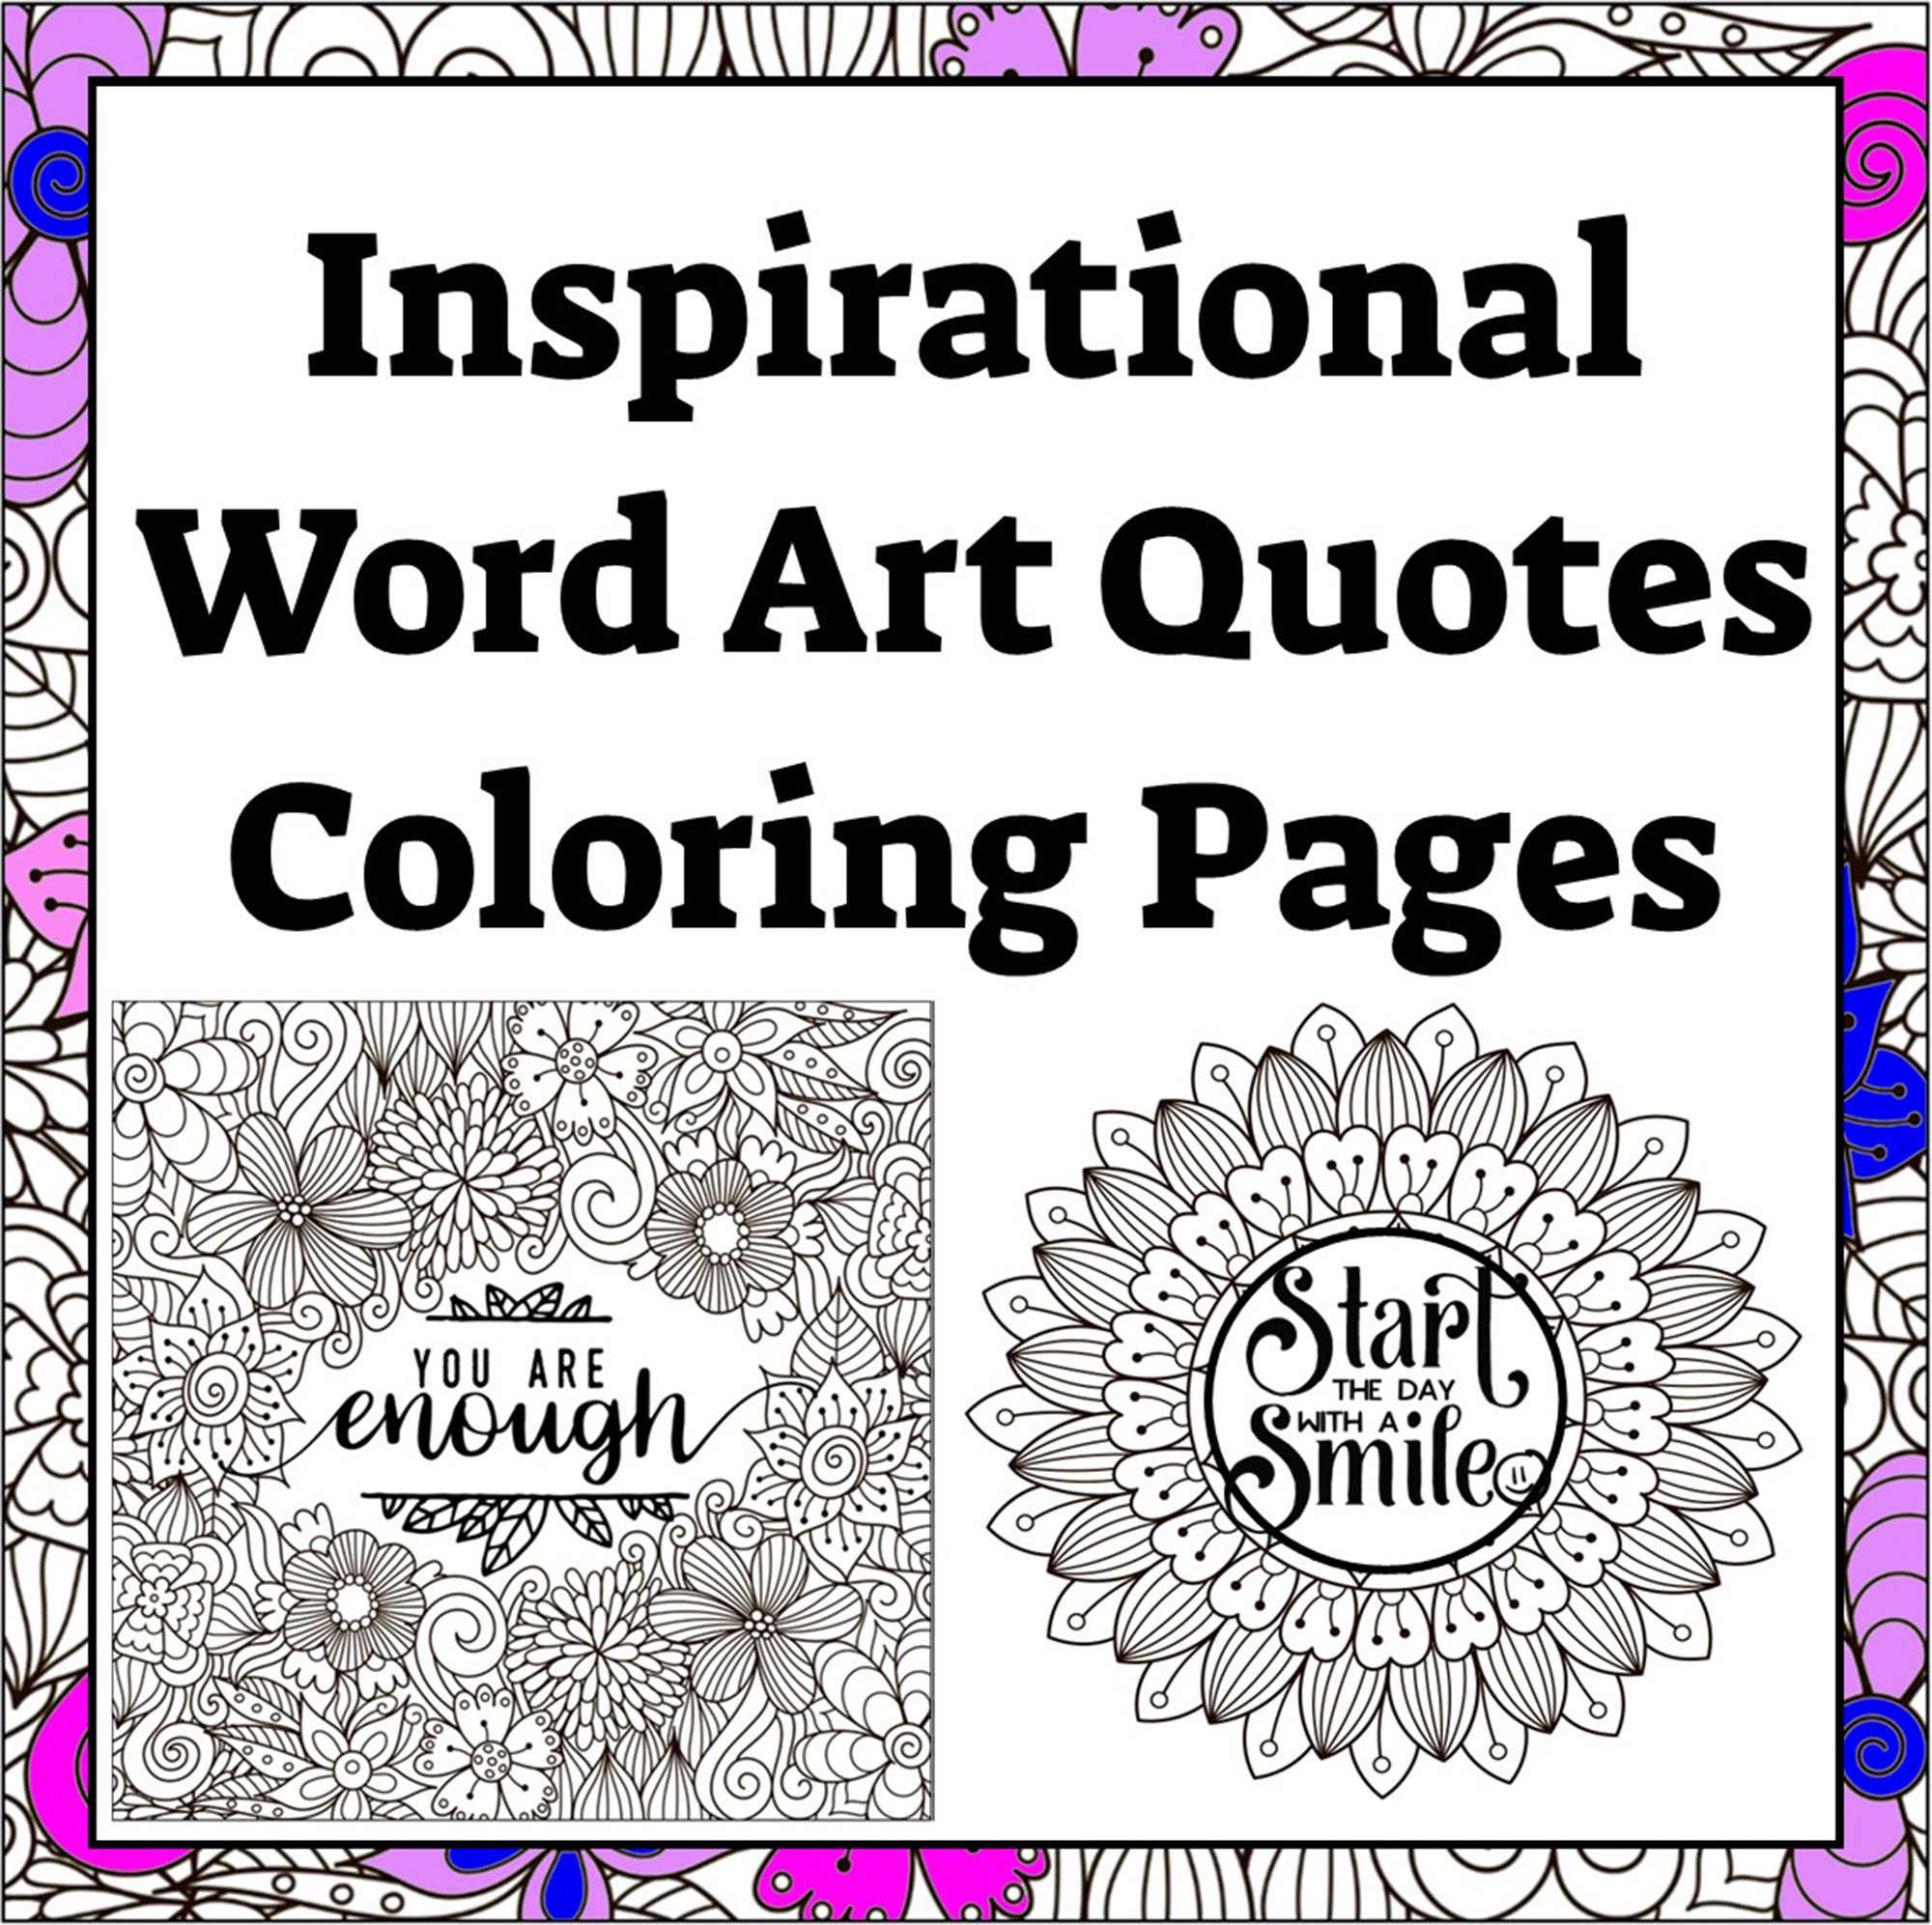 Easy quotes to draw | Doodle quotes, Drawing quotes, Draw quotes doodles